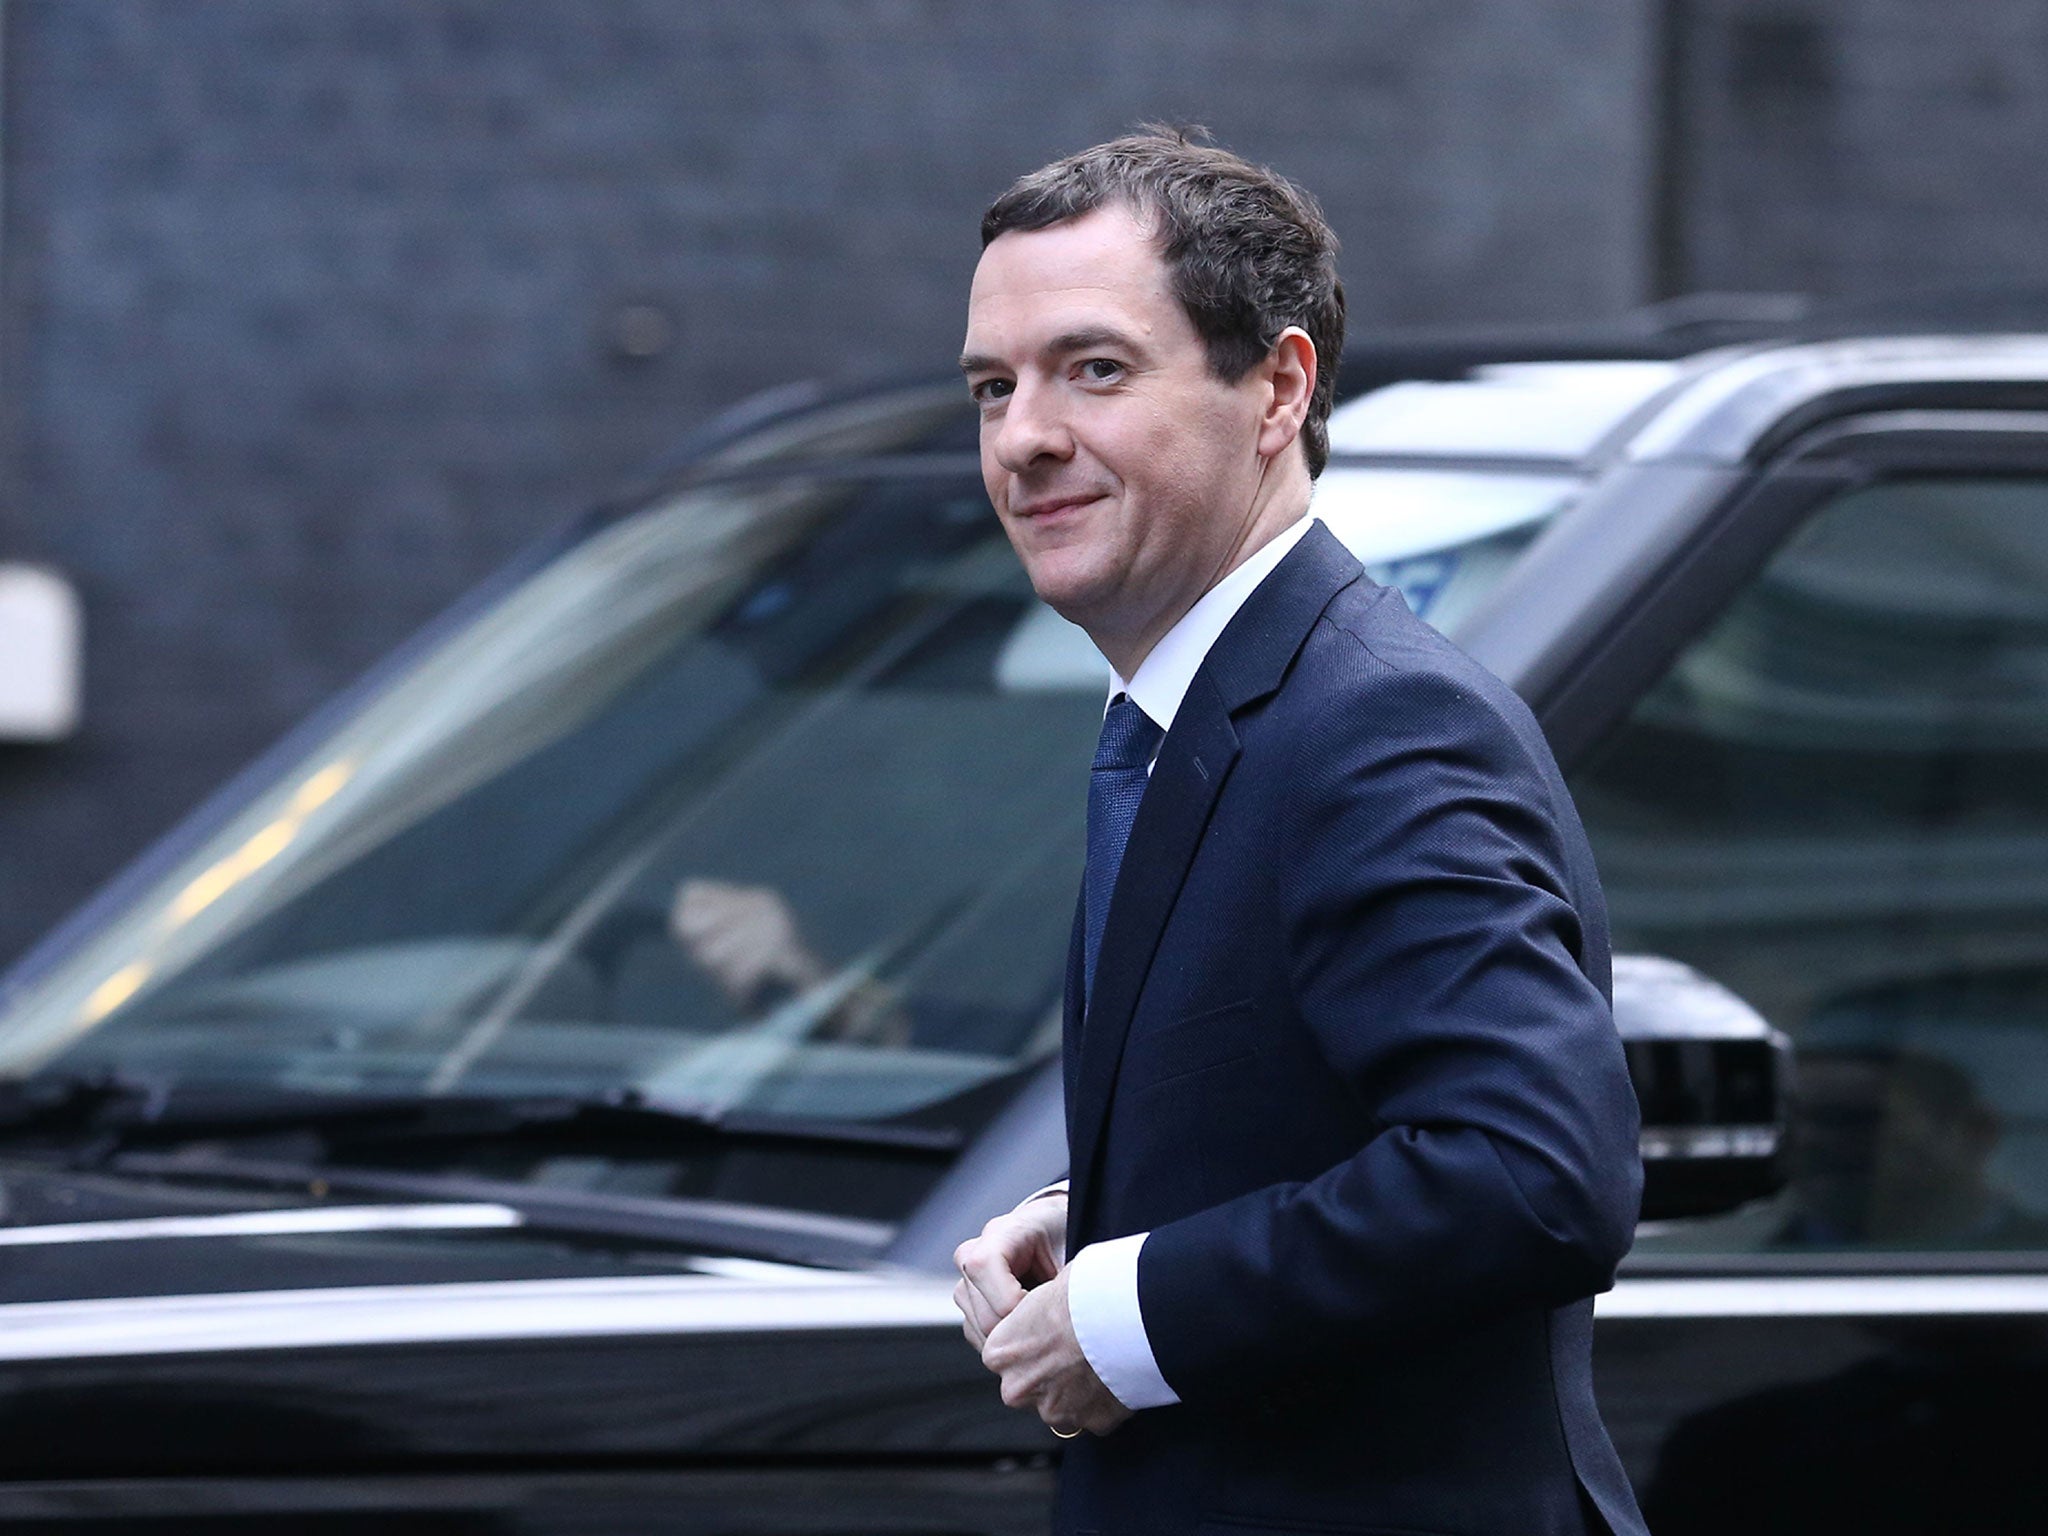 Britain's Chancellor of the Exchequer George Osborne arrives at Downing Street in London